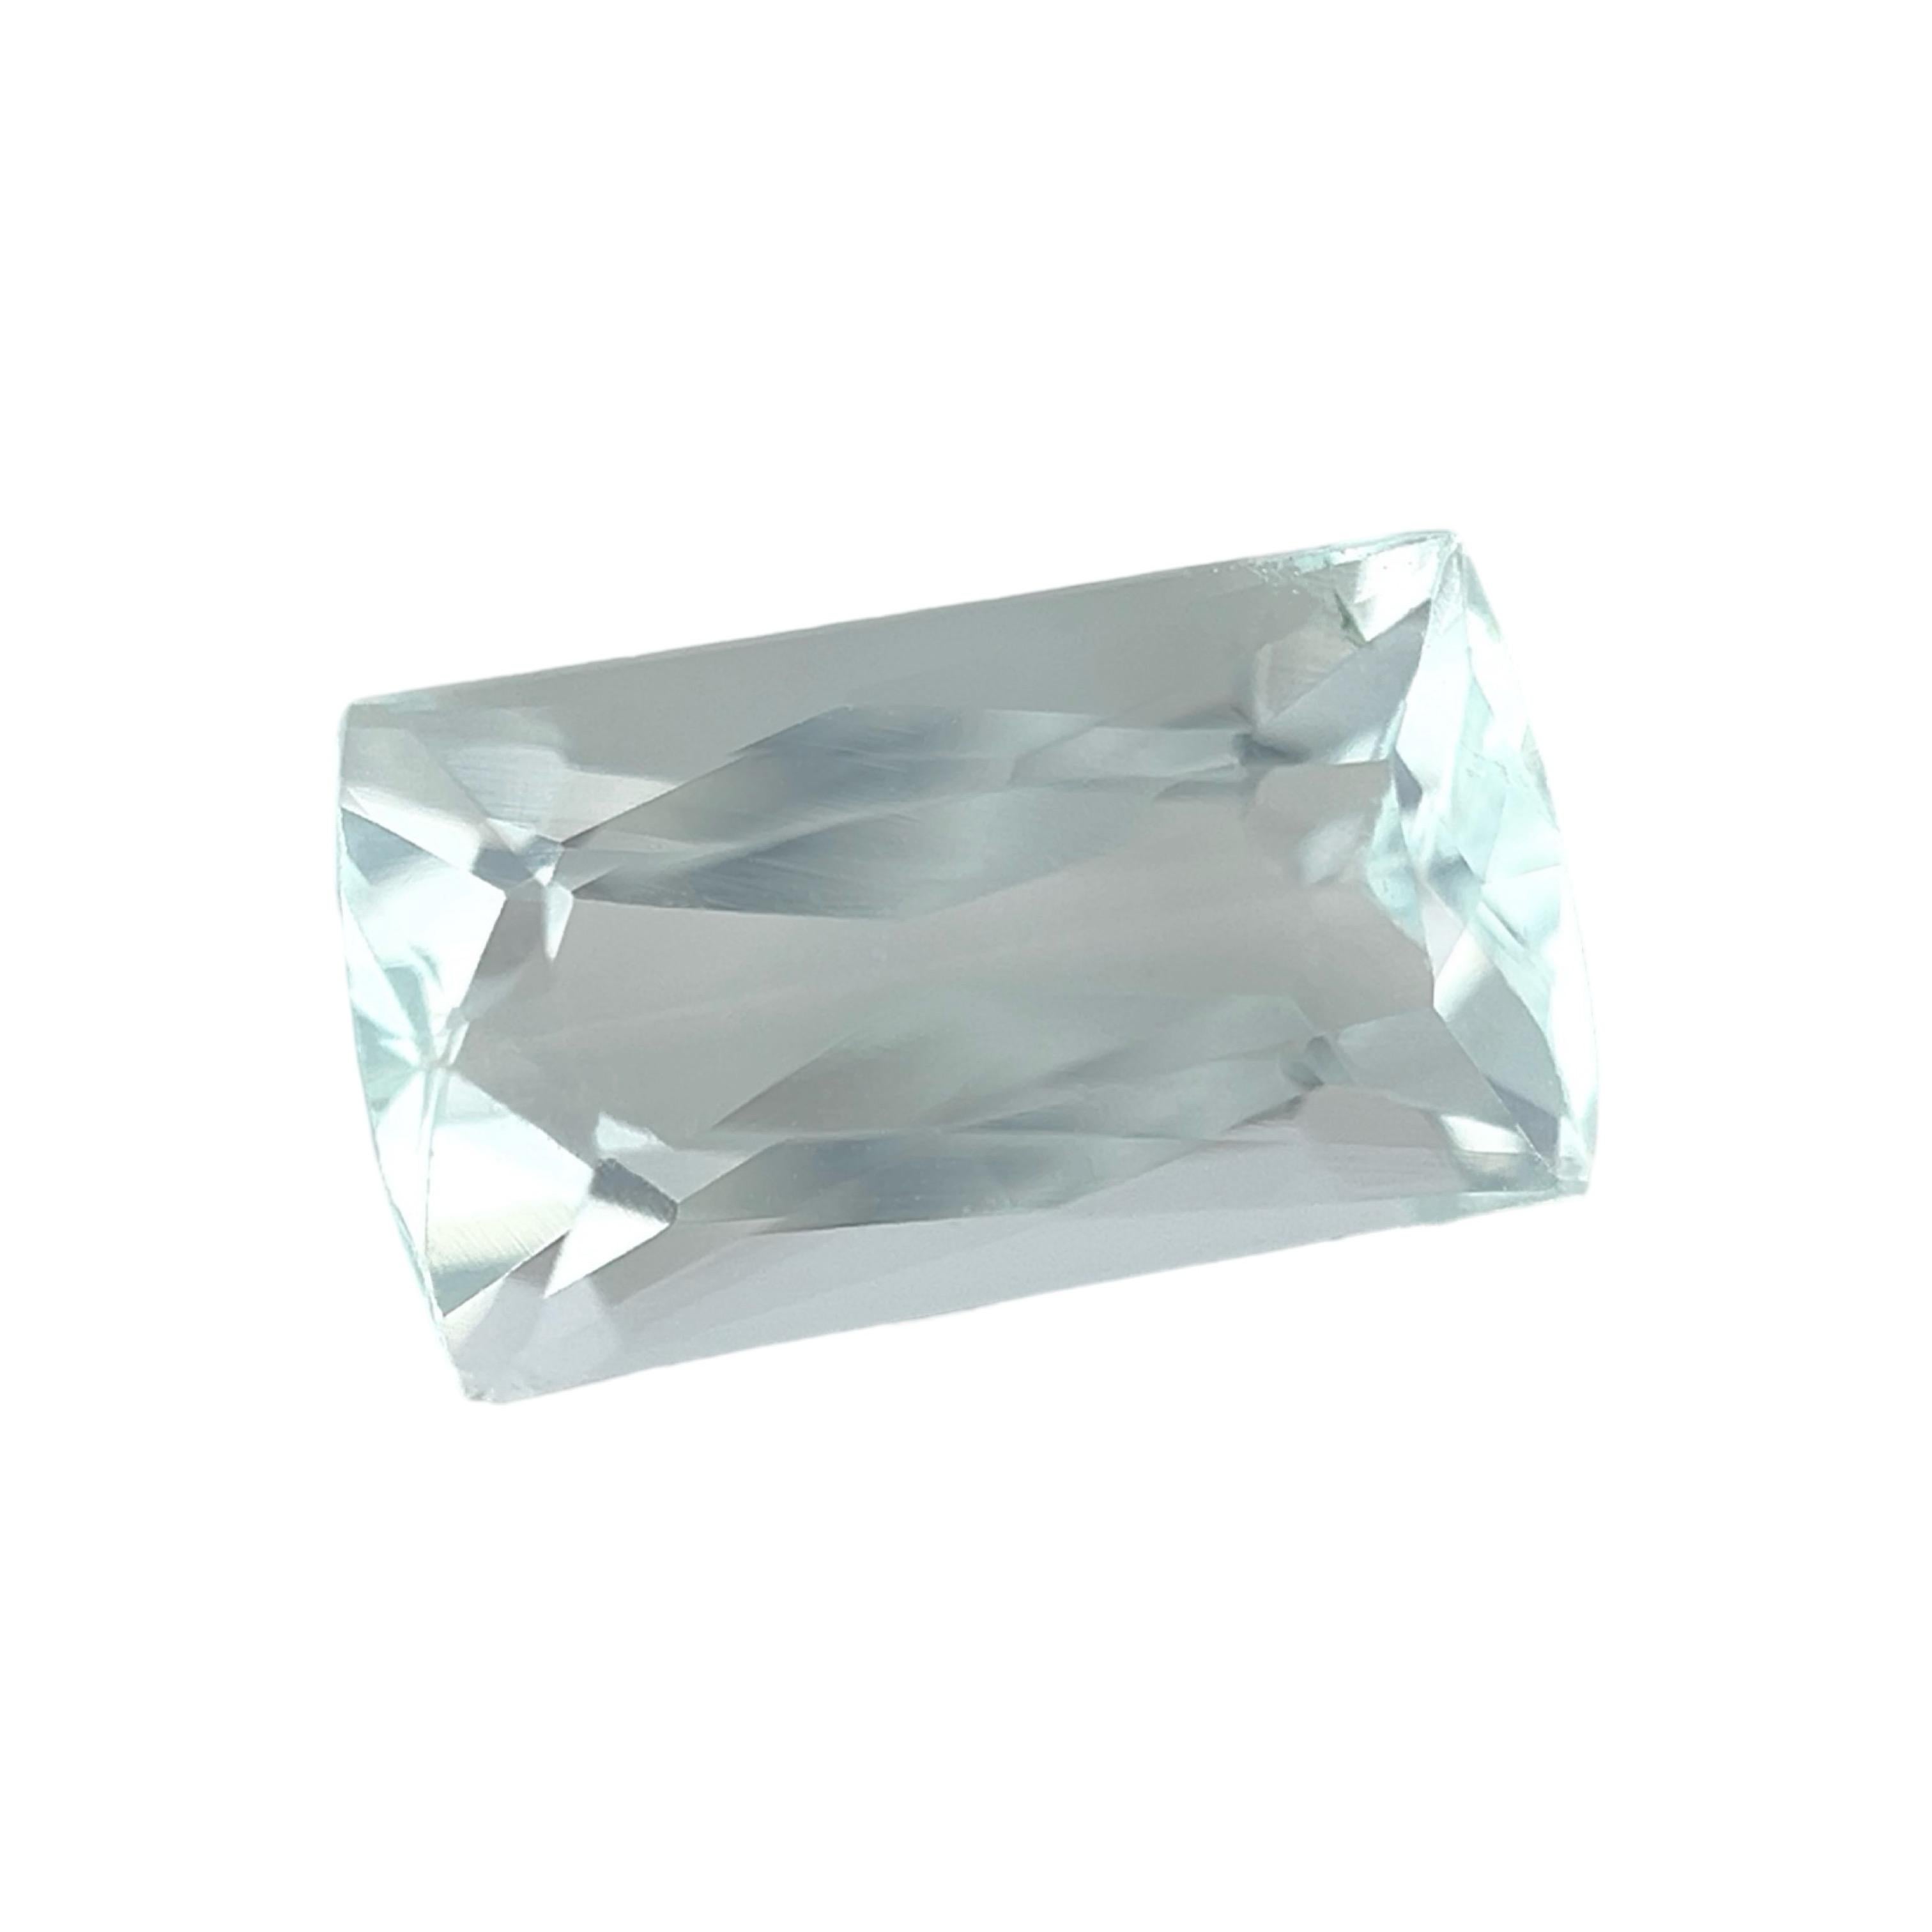 Fine Blue Aquamarine 3.06ct Fancy Scissor Octagon Cut Beryl Gemstone 11.8x6.7mm

Natural loose blue Aquamarine gem. 3.06 carat stone with a bright blue colour and excellent clarity. Very clean stone with only some small natural inclusions visible